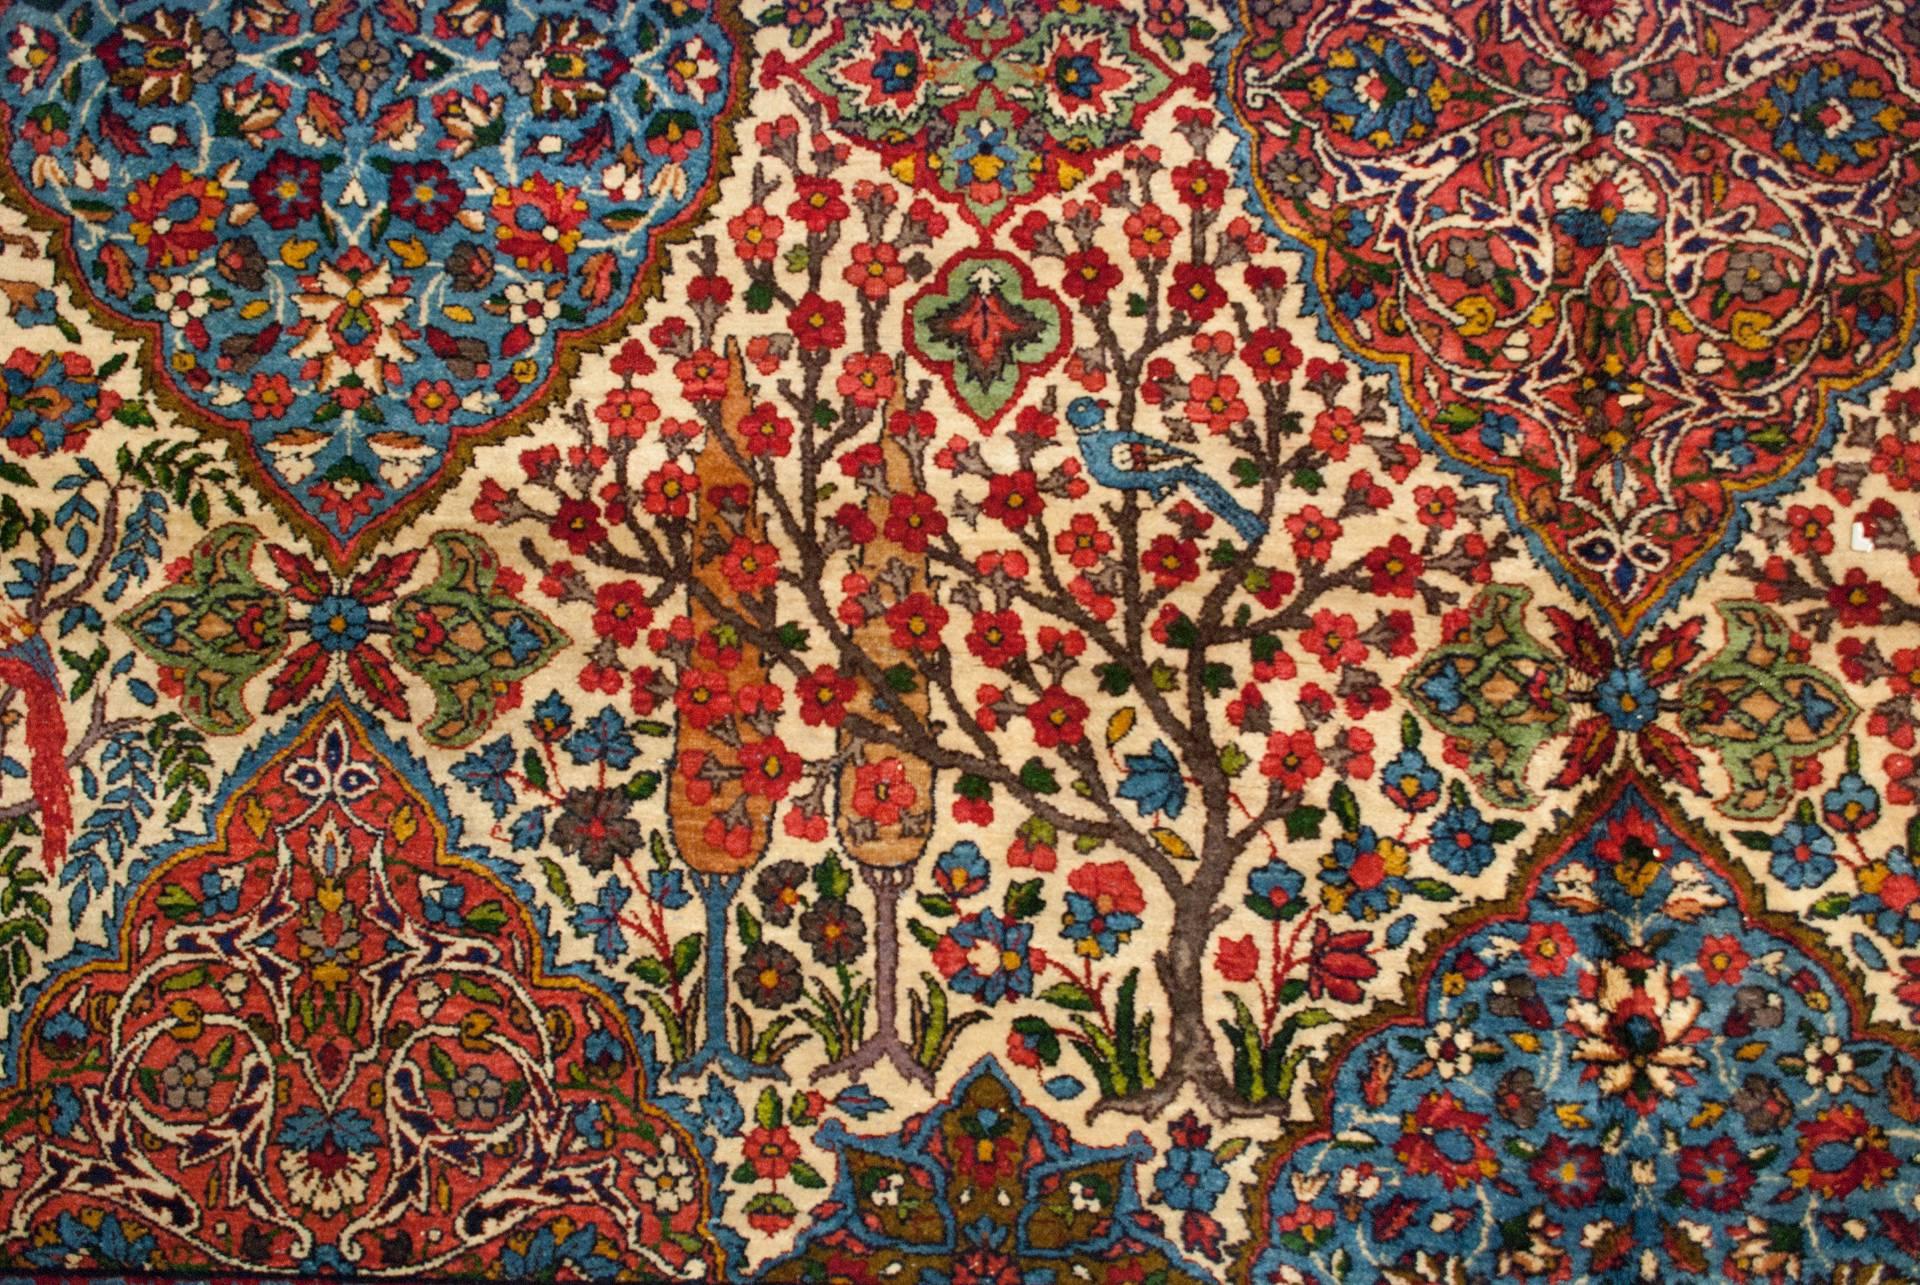 An unbelievable late 19th century Yazd rug with the most amazing intricately woven multicolored pattern of diamond shapes, each woven with unique myriad varieties of flowering vines, trees, and shrubs, with birds perched on branches. The border is